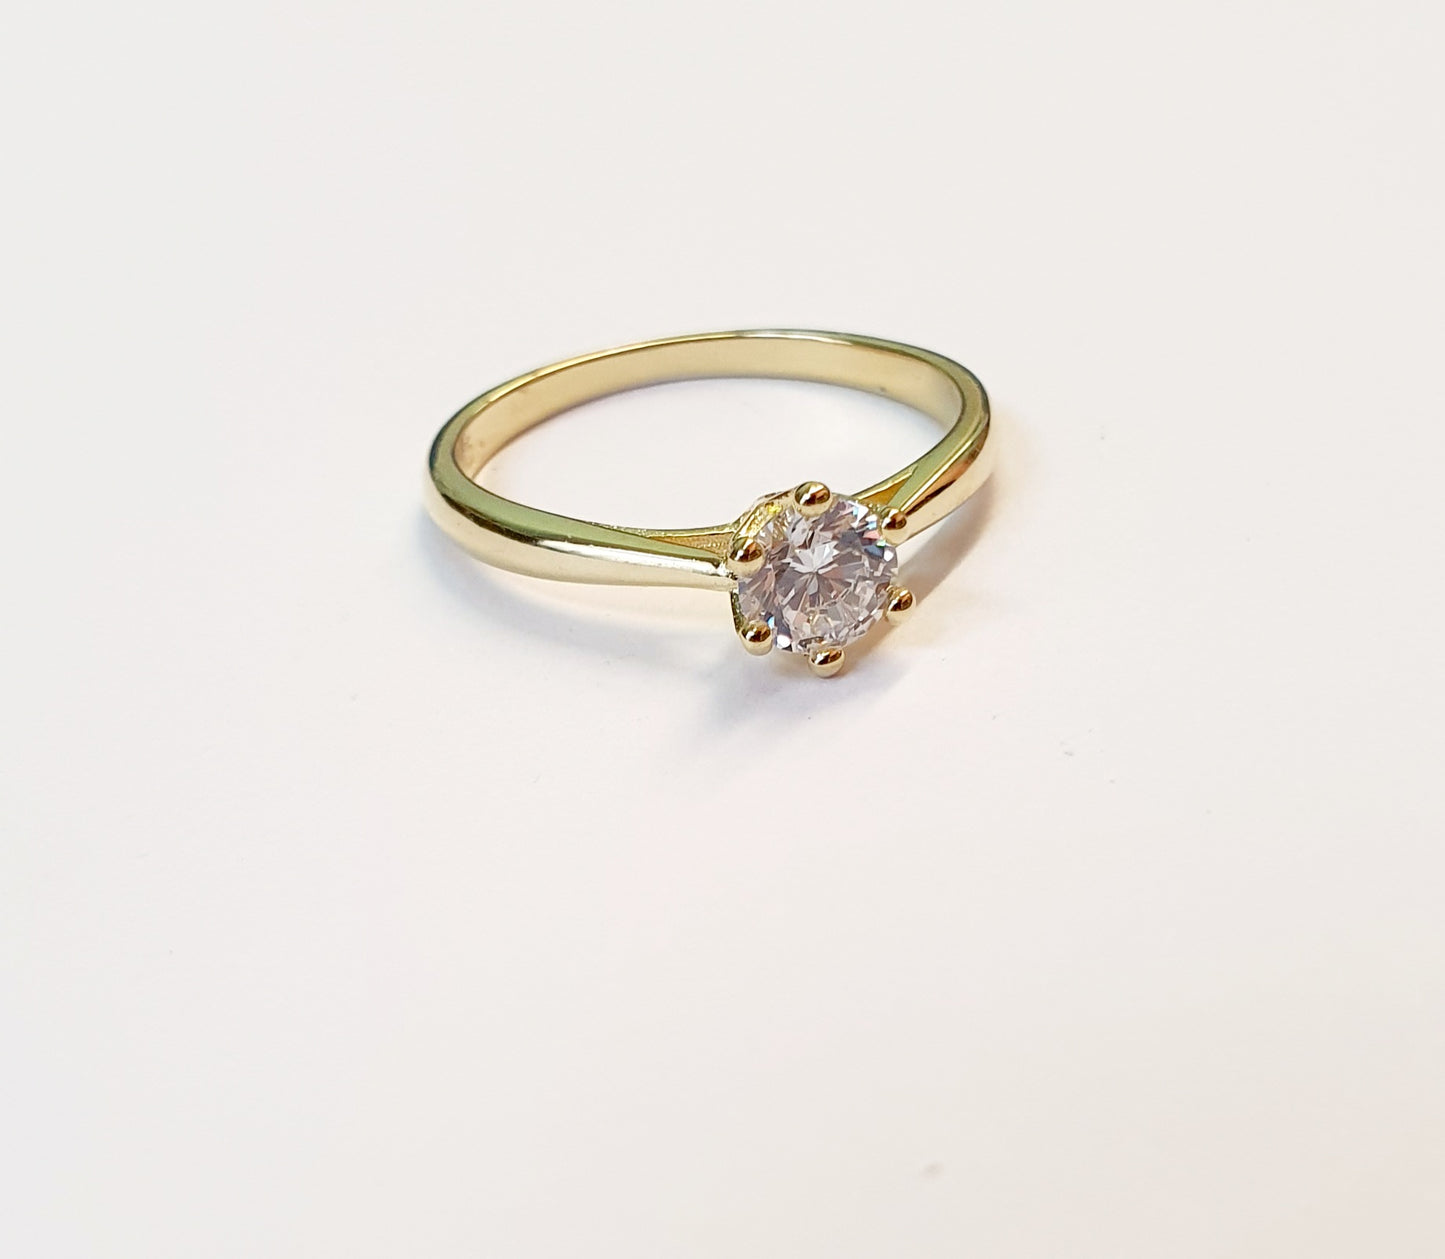 Solitaire fiance ring